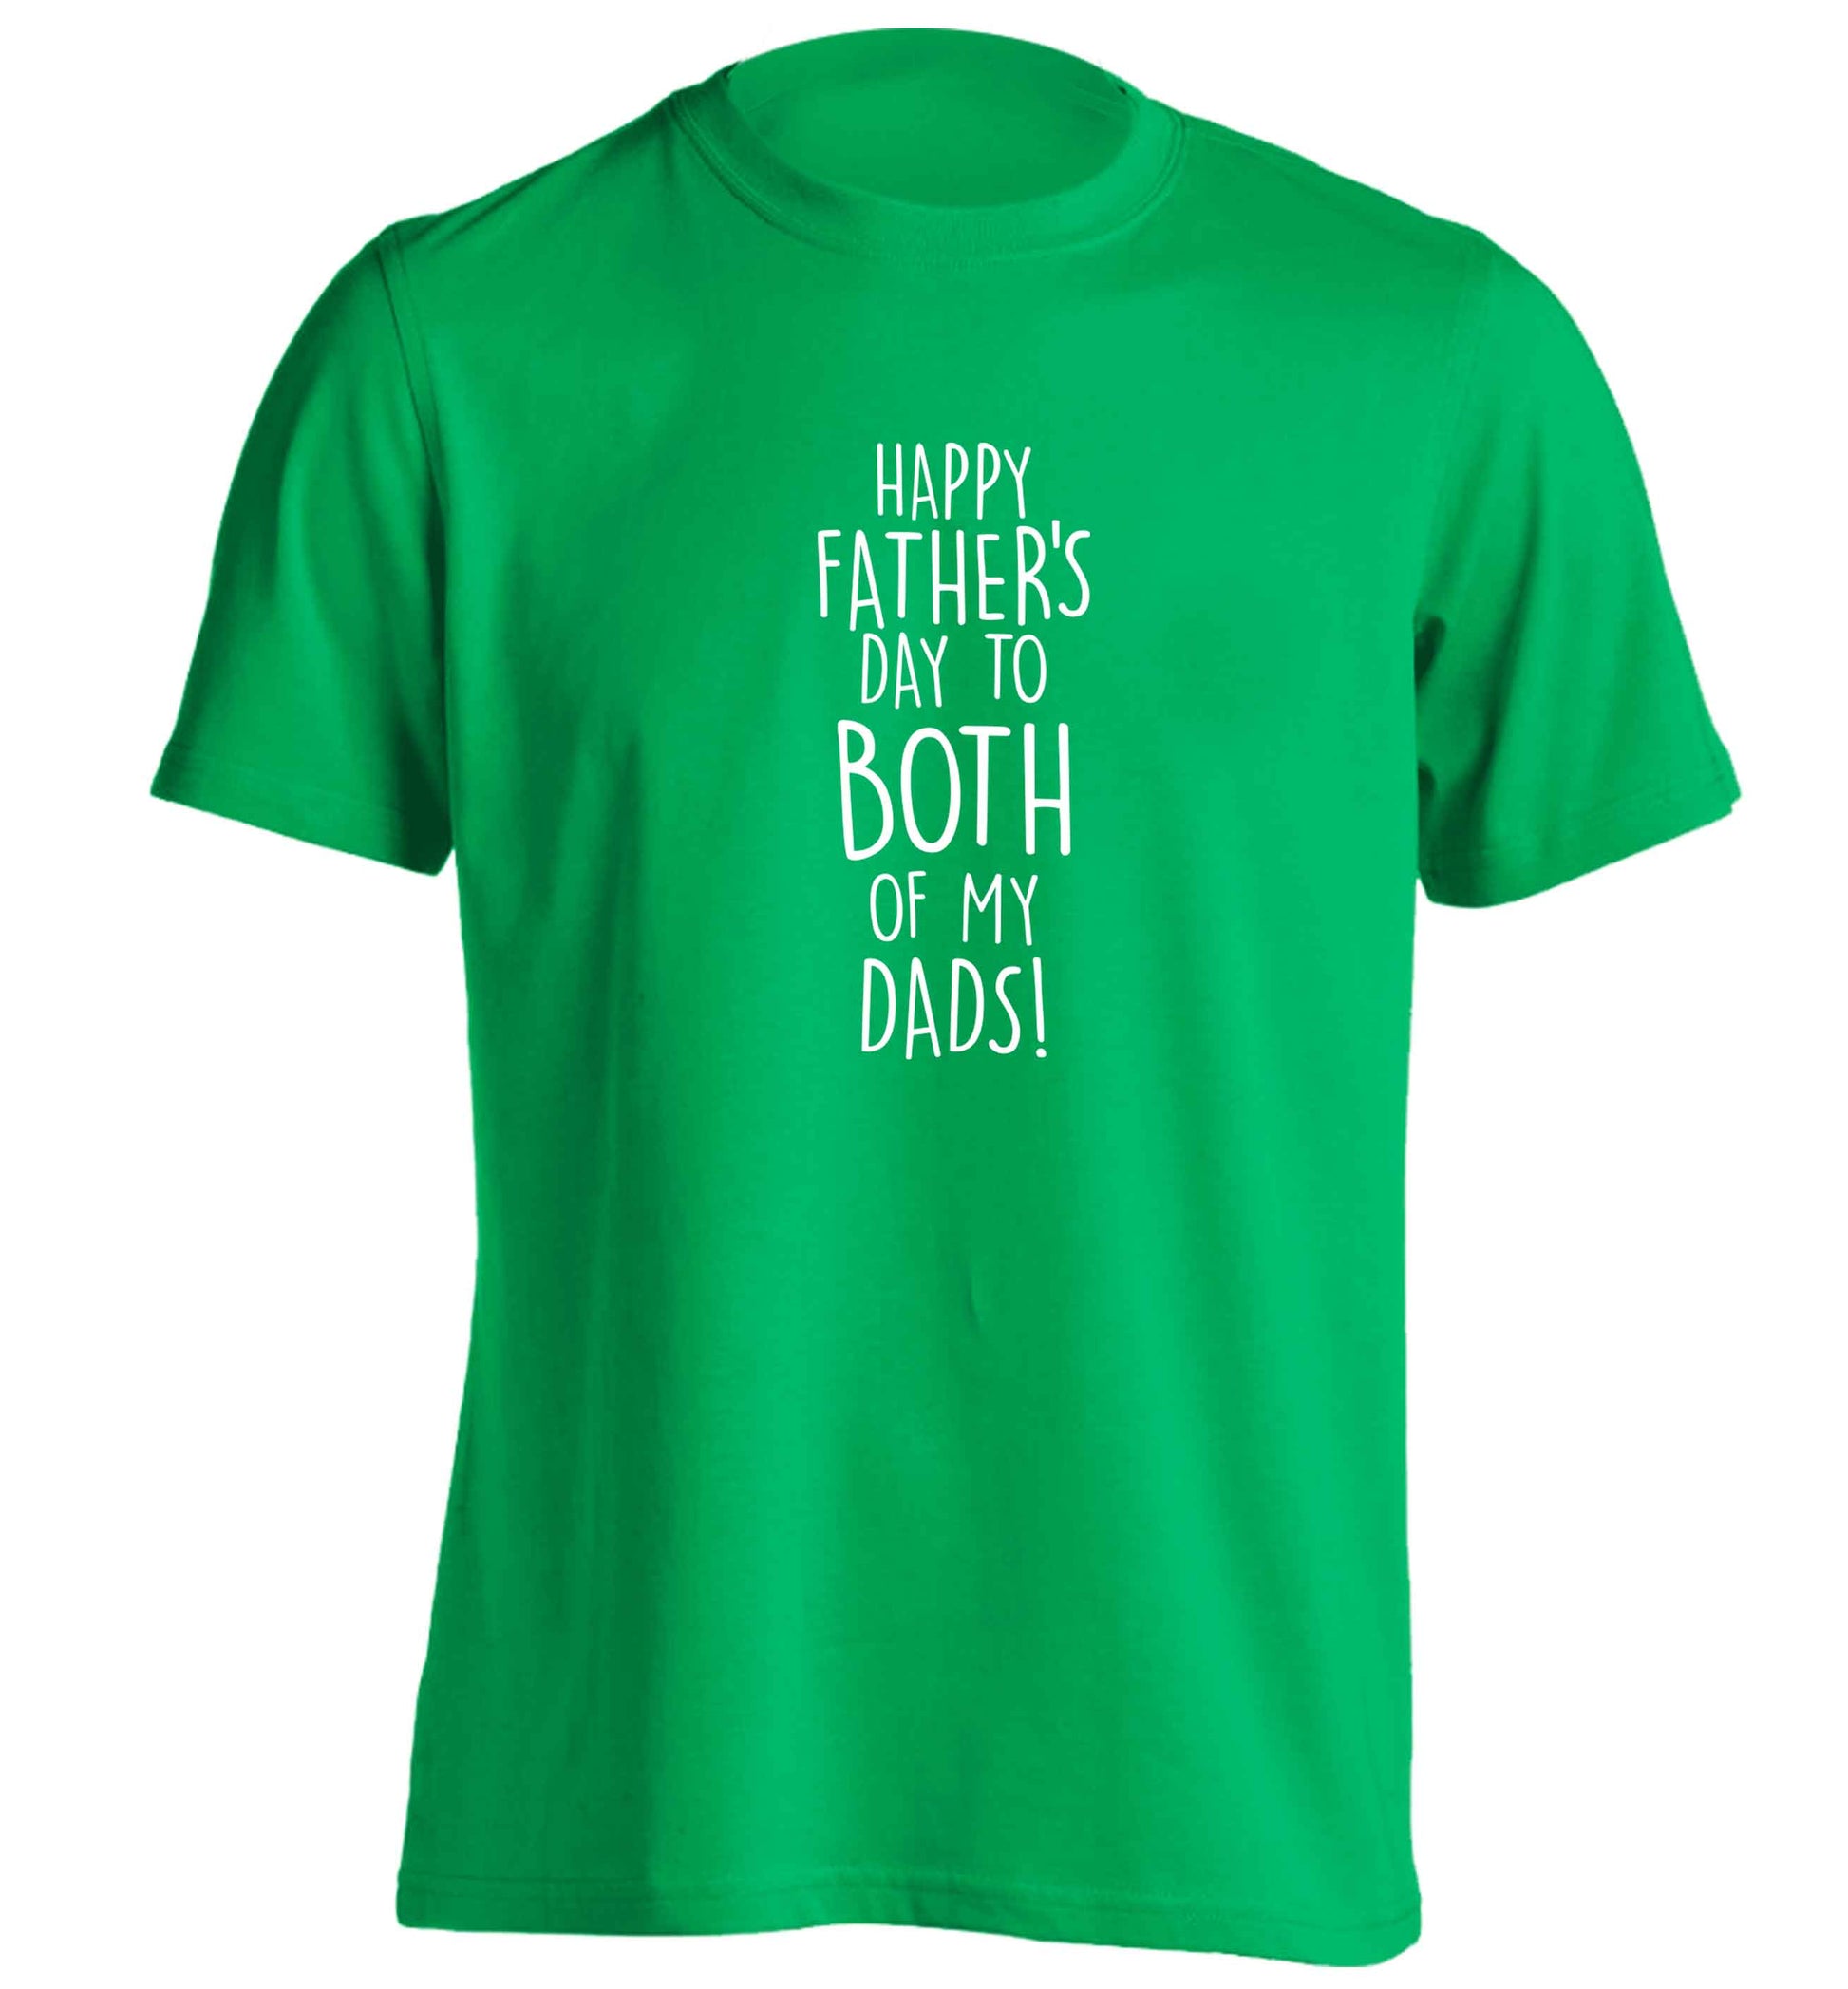 Happy Father's day to both of my dads adults unisex green Tshirt 2XL